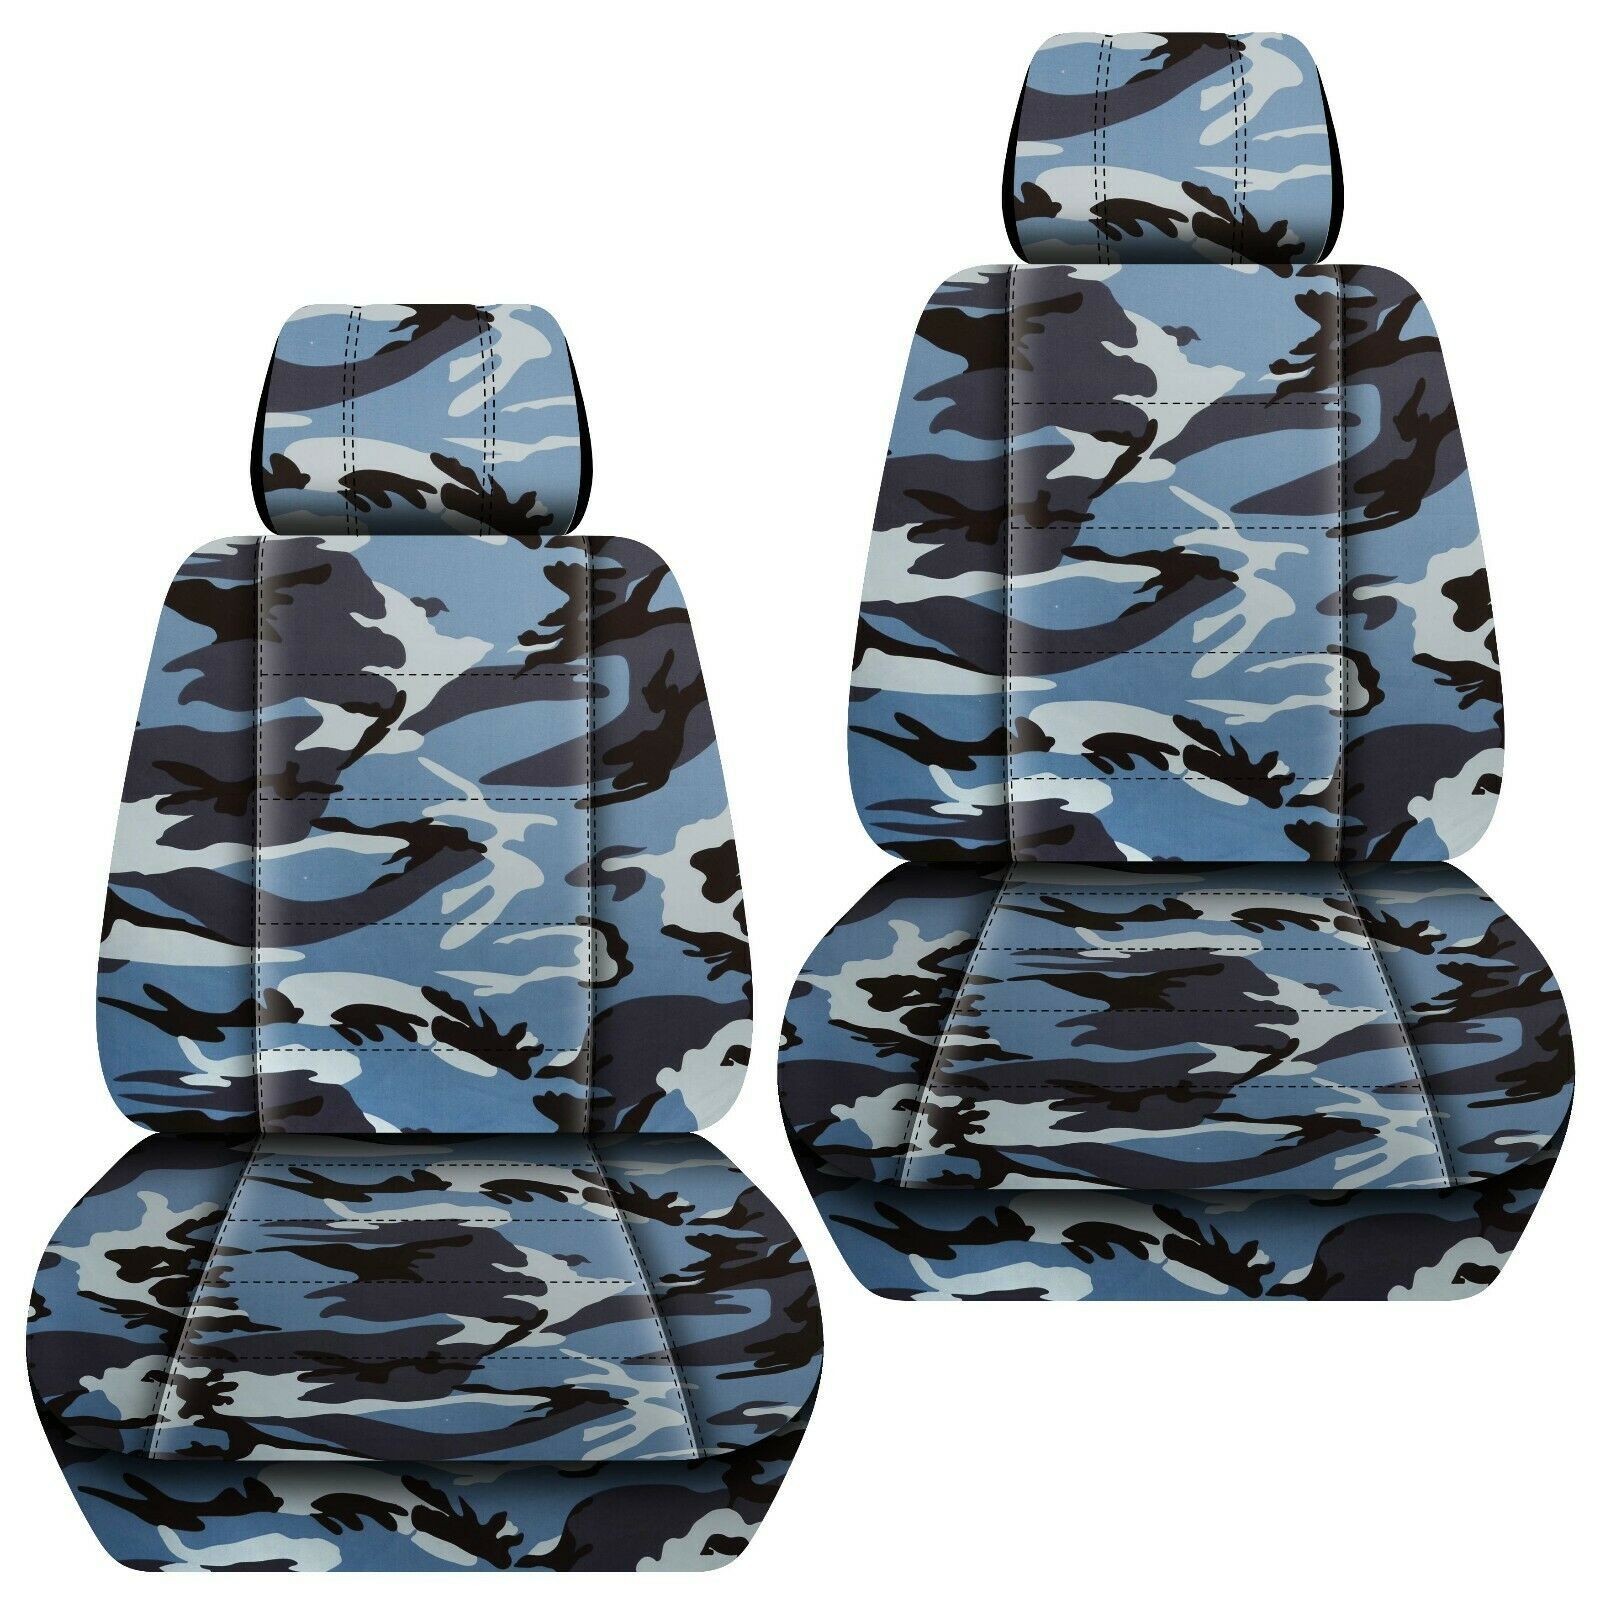 2011 Toyota Tundra Crewmax Seat Covers